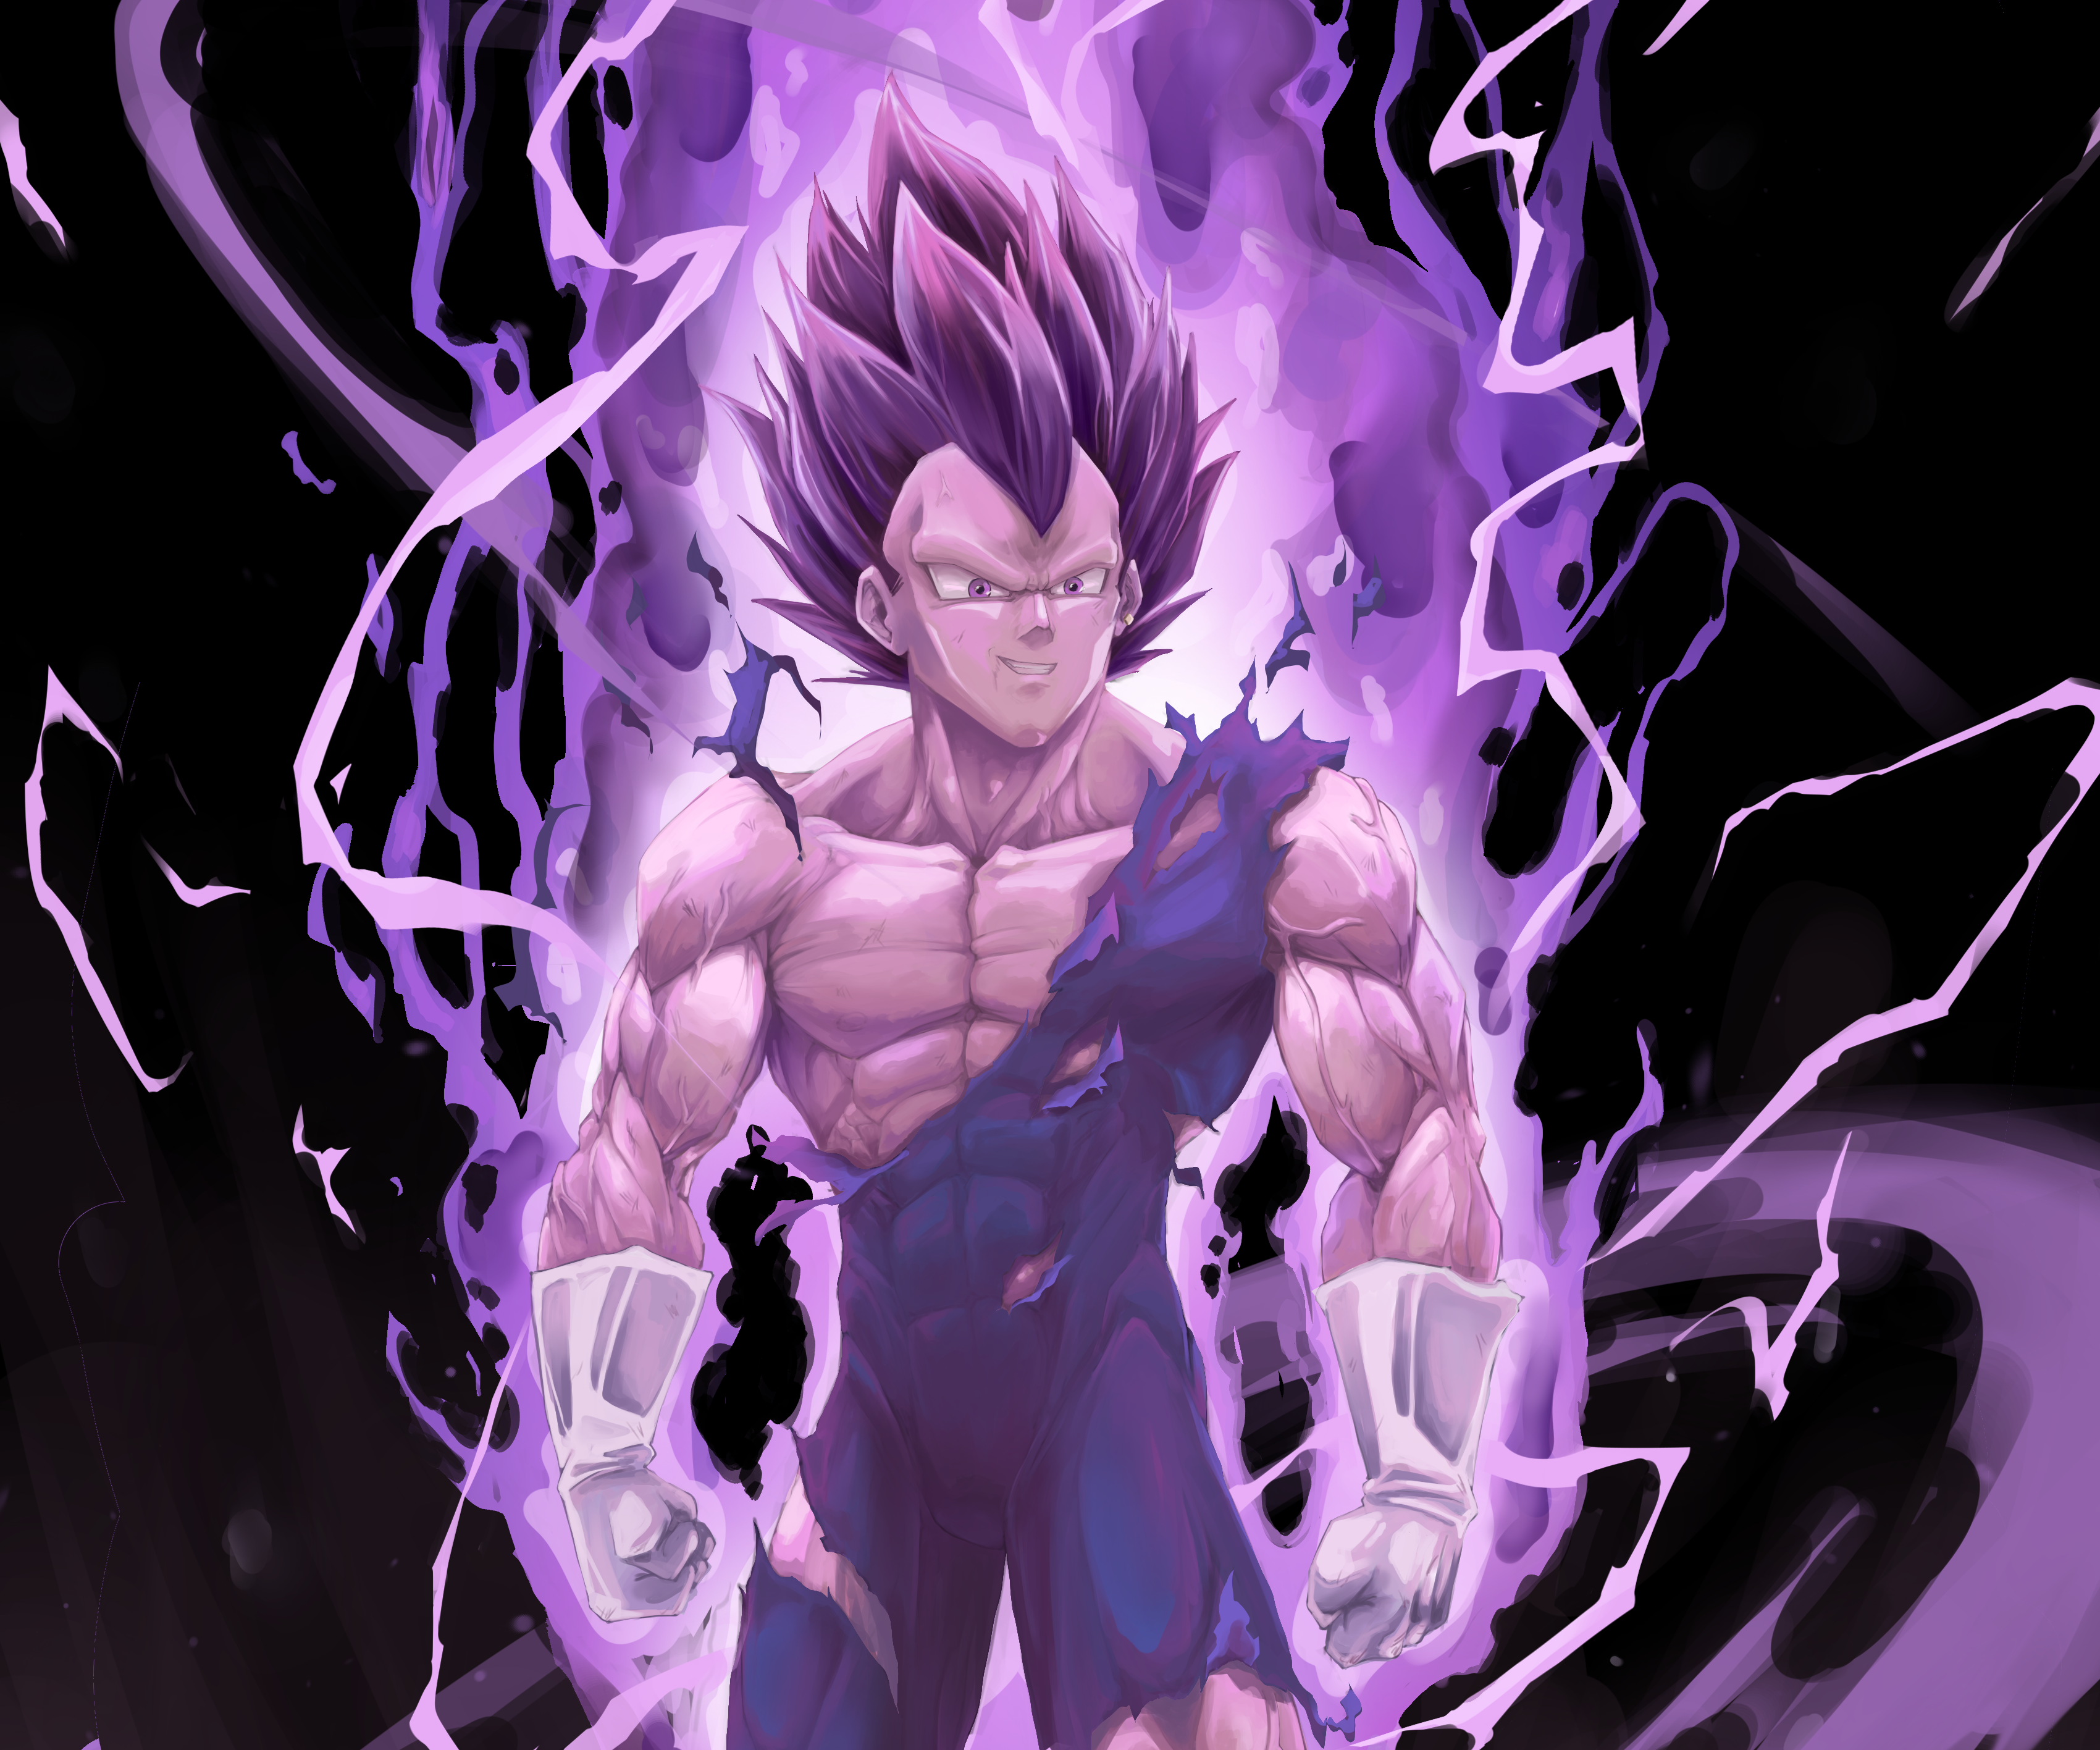 Ego and Instinct Finishing off my latest project here is the card art for  the Perfected Ultra Instinct Goku and Ultra Ego Vegeta to go along with the  previous edit included in